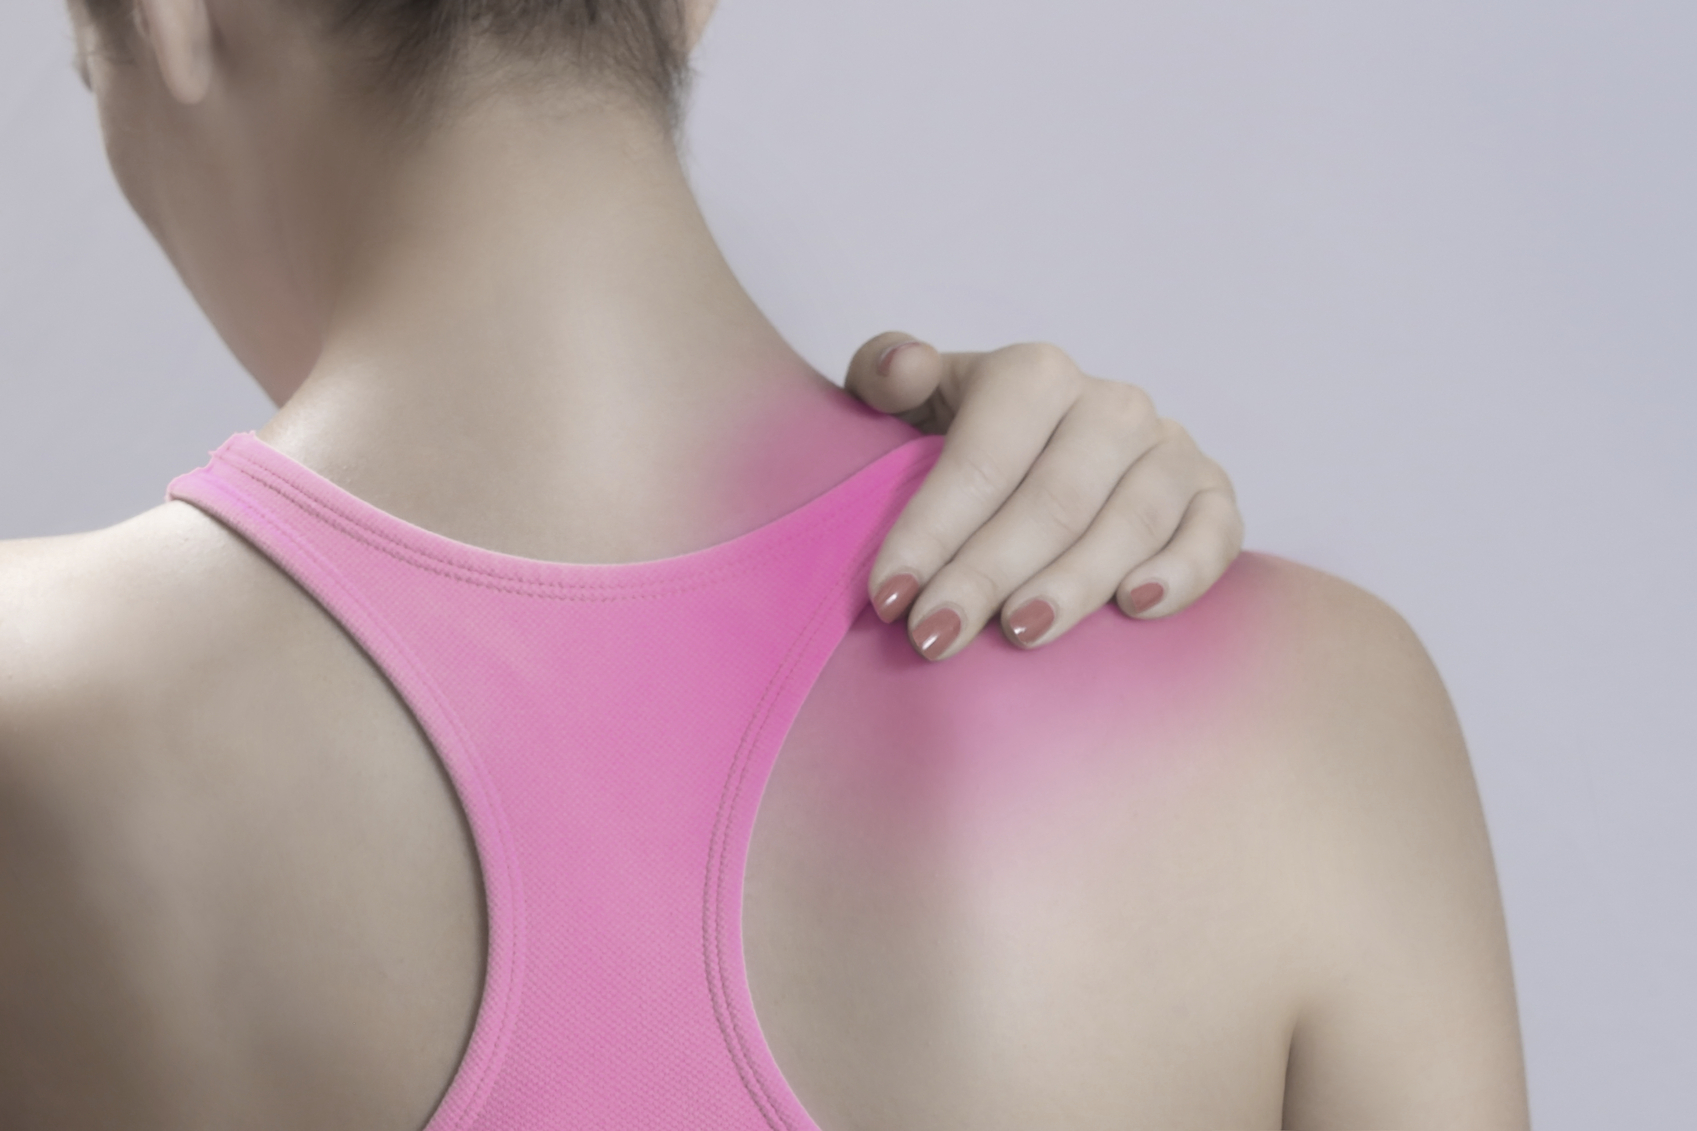 Astym Therapy Gave Me Relief from Shoulder Pain